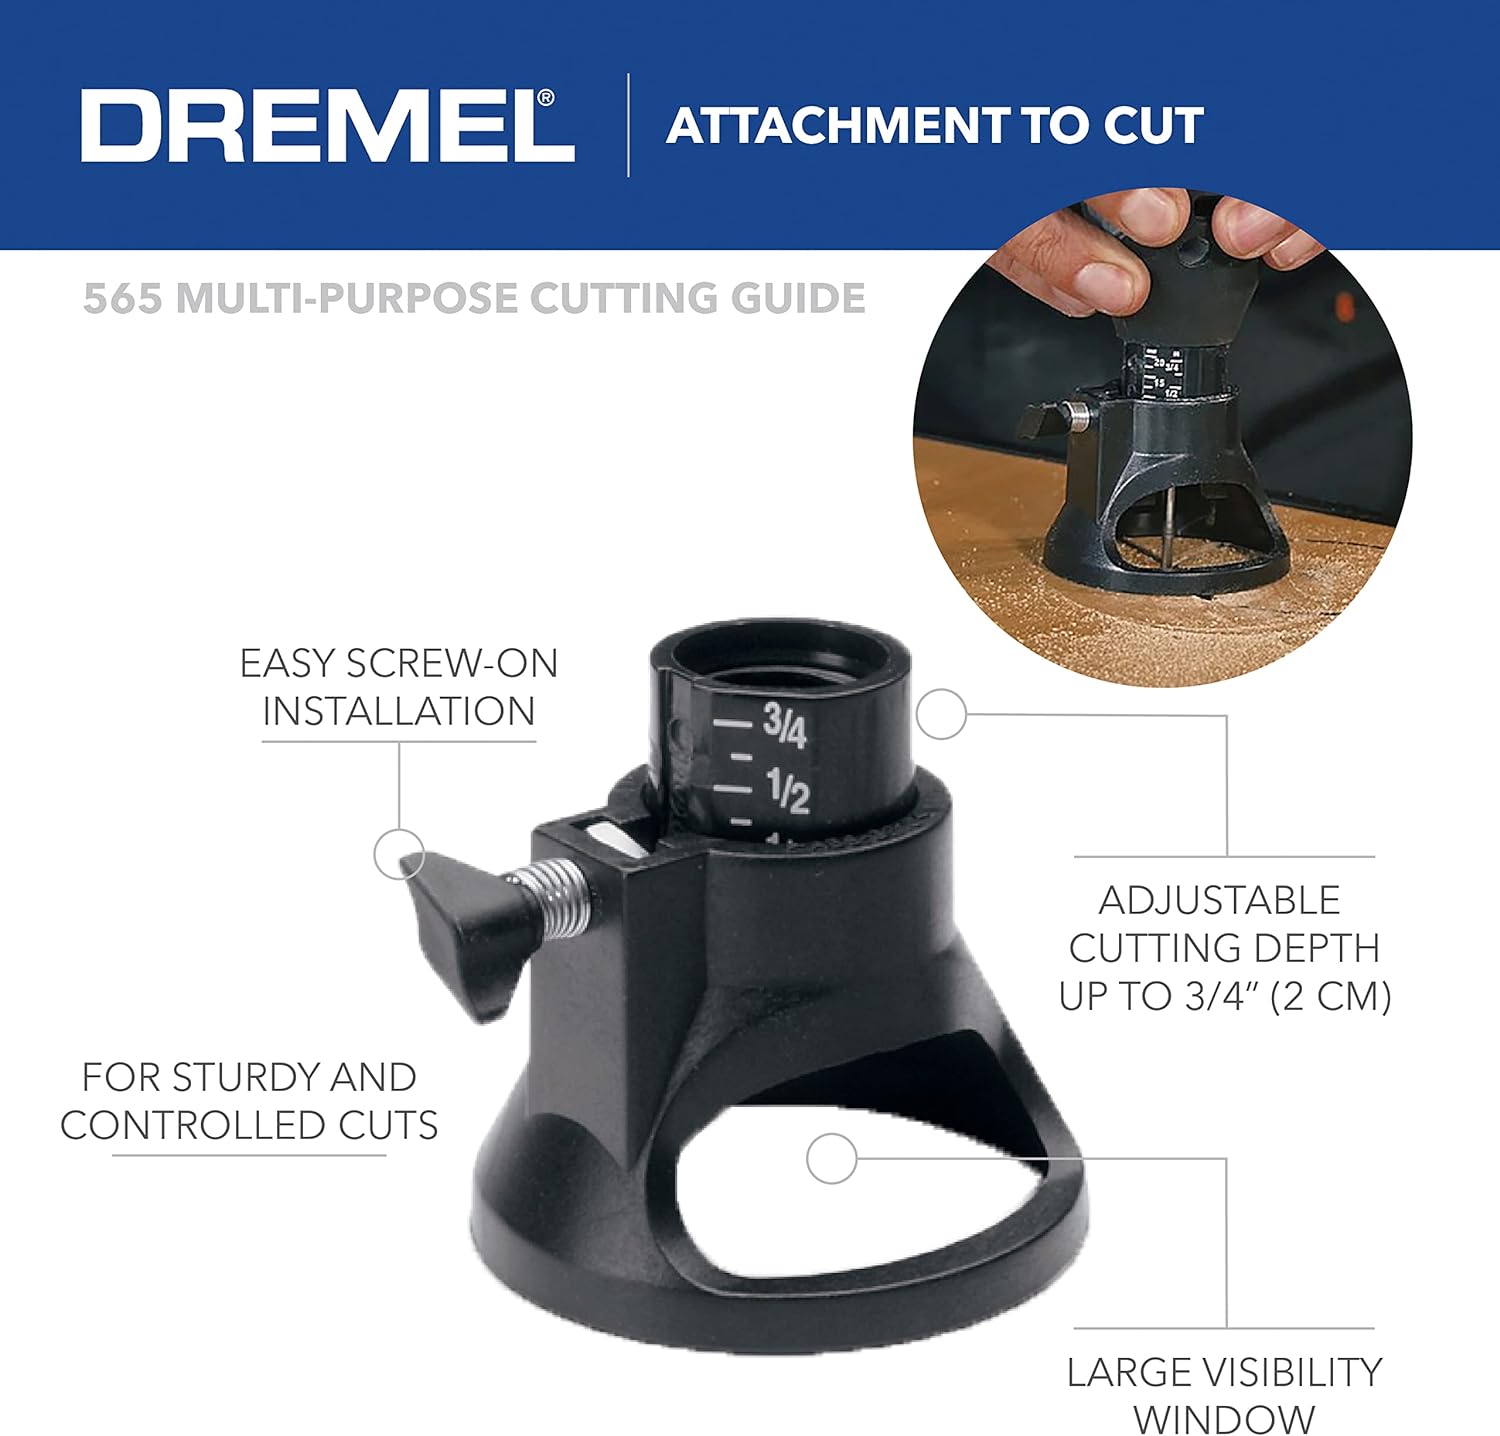 Dremel 8220-1/28 12-Volt Max Cordless Rotary Tool Kit- Engraver, Sander,  and Polisher- Perfect for Cutting, Wood Carving, Engraving, Polishing, and